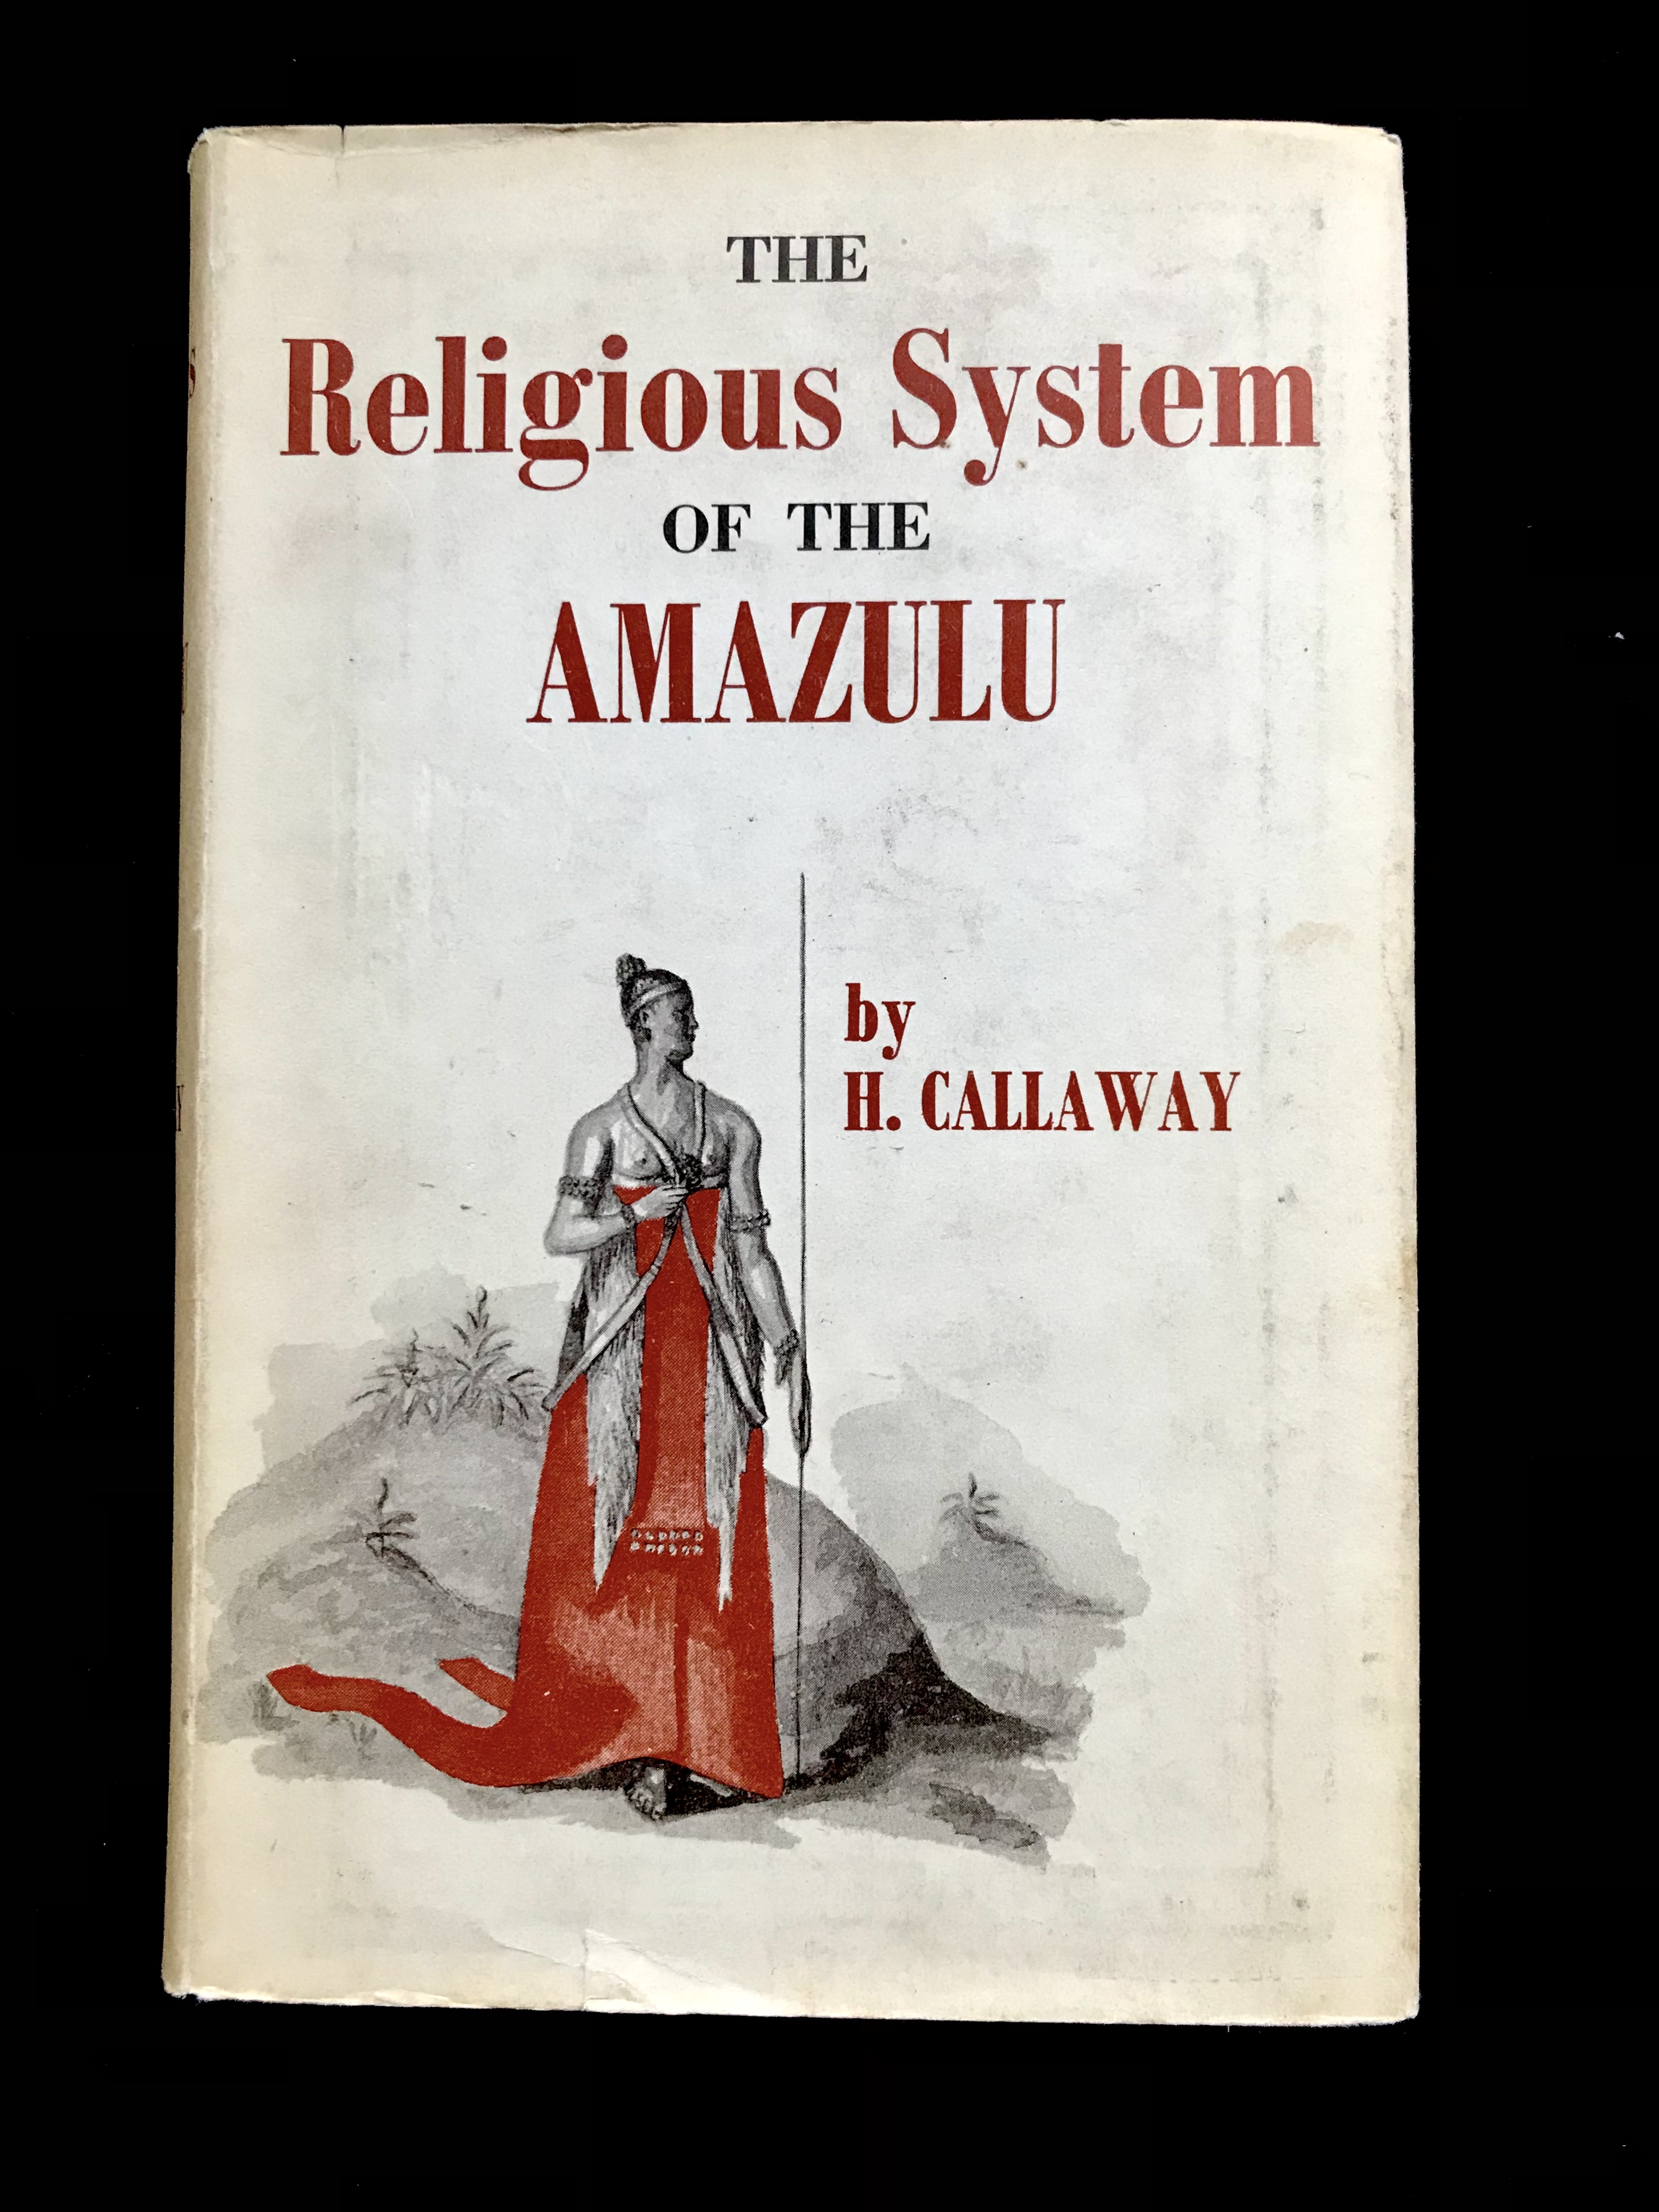 The Religious System of The Amazulu by H. Callaway